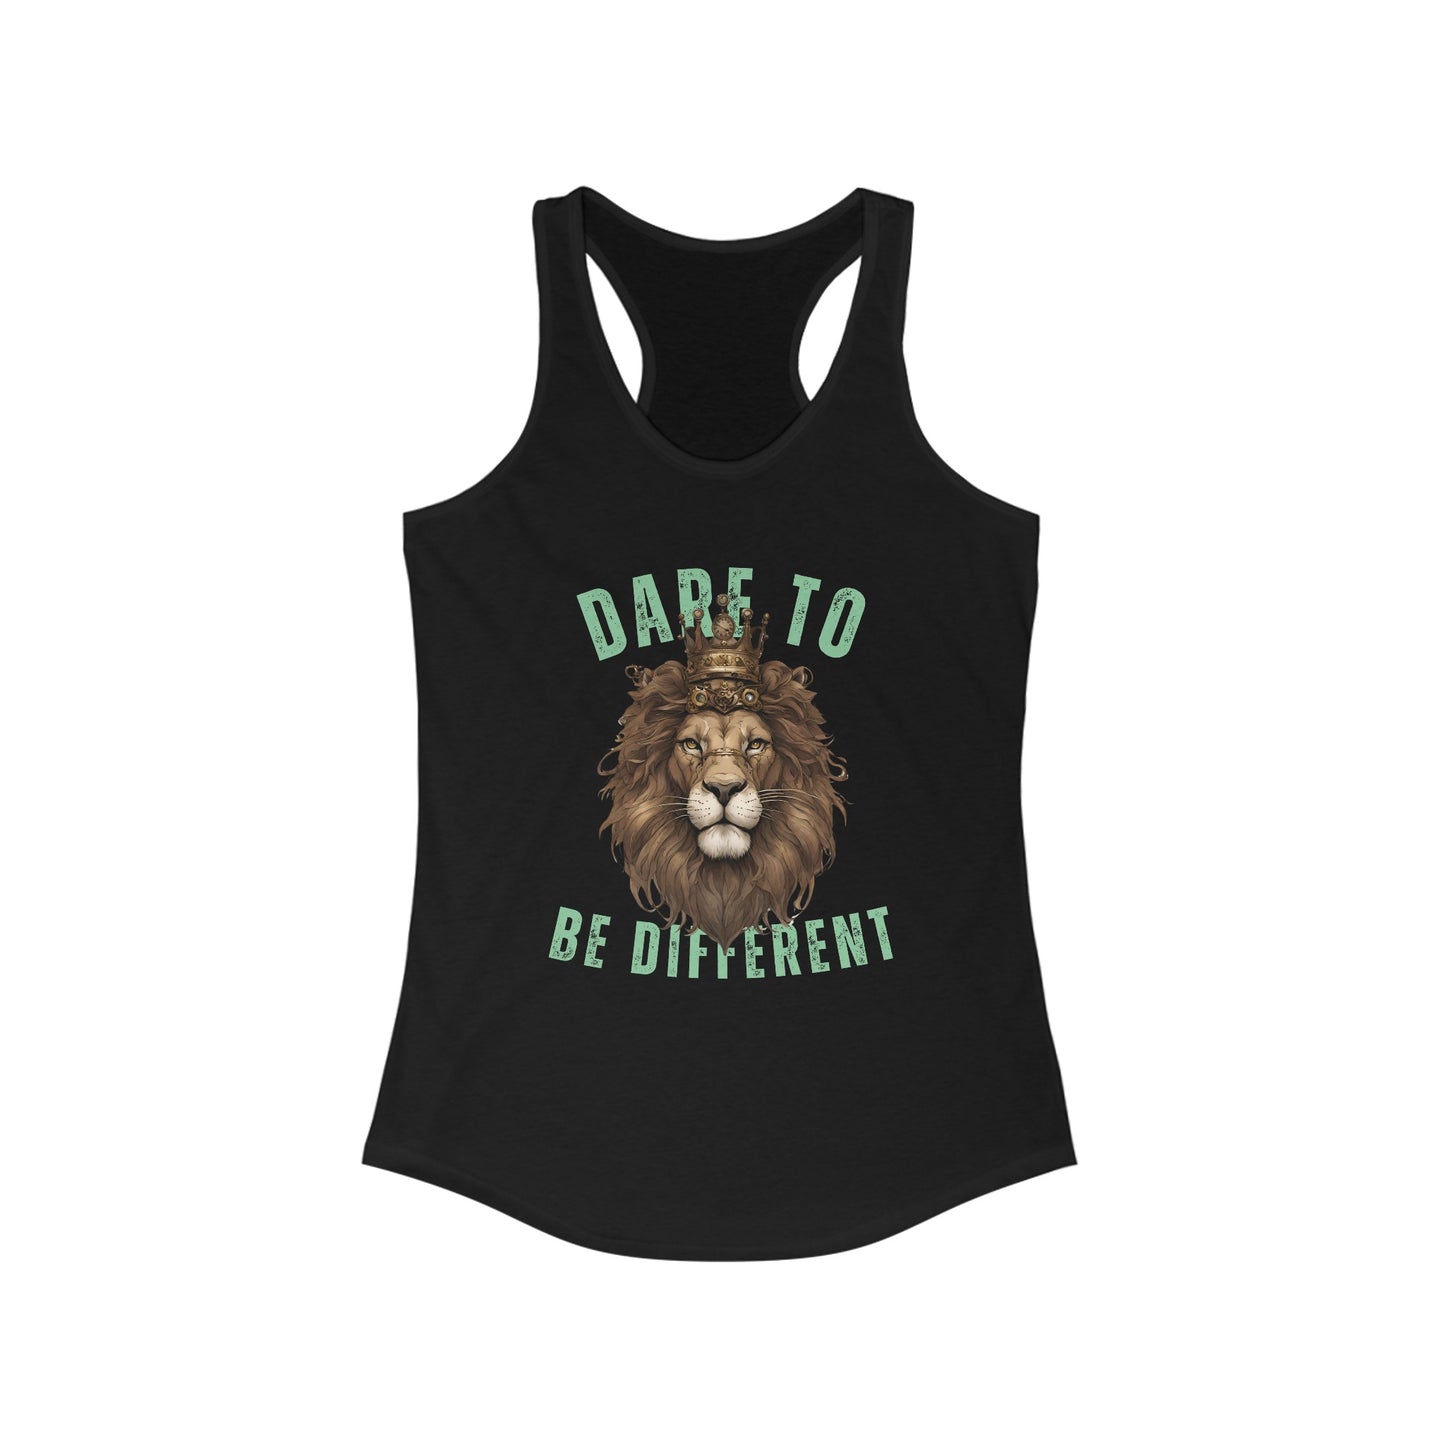 Dare to be different Tank Top